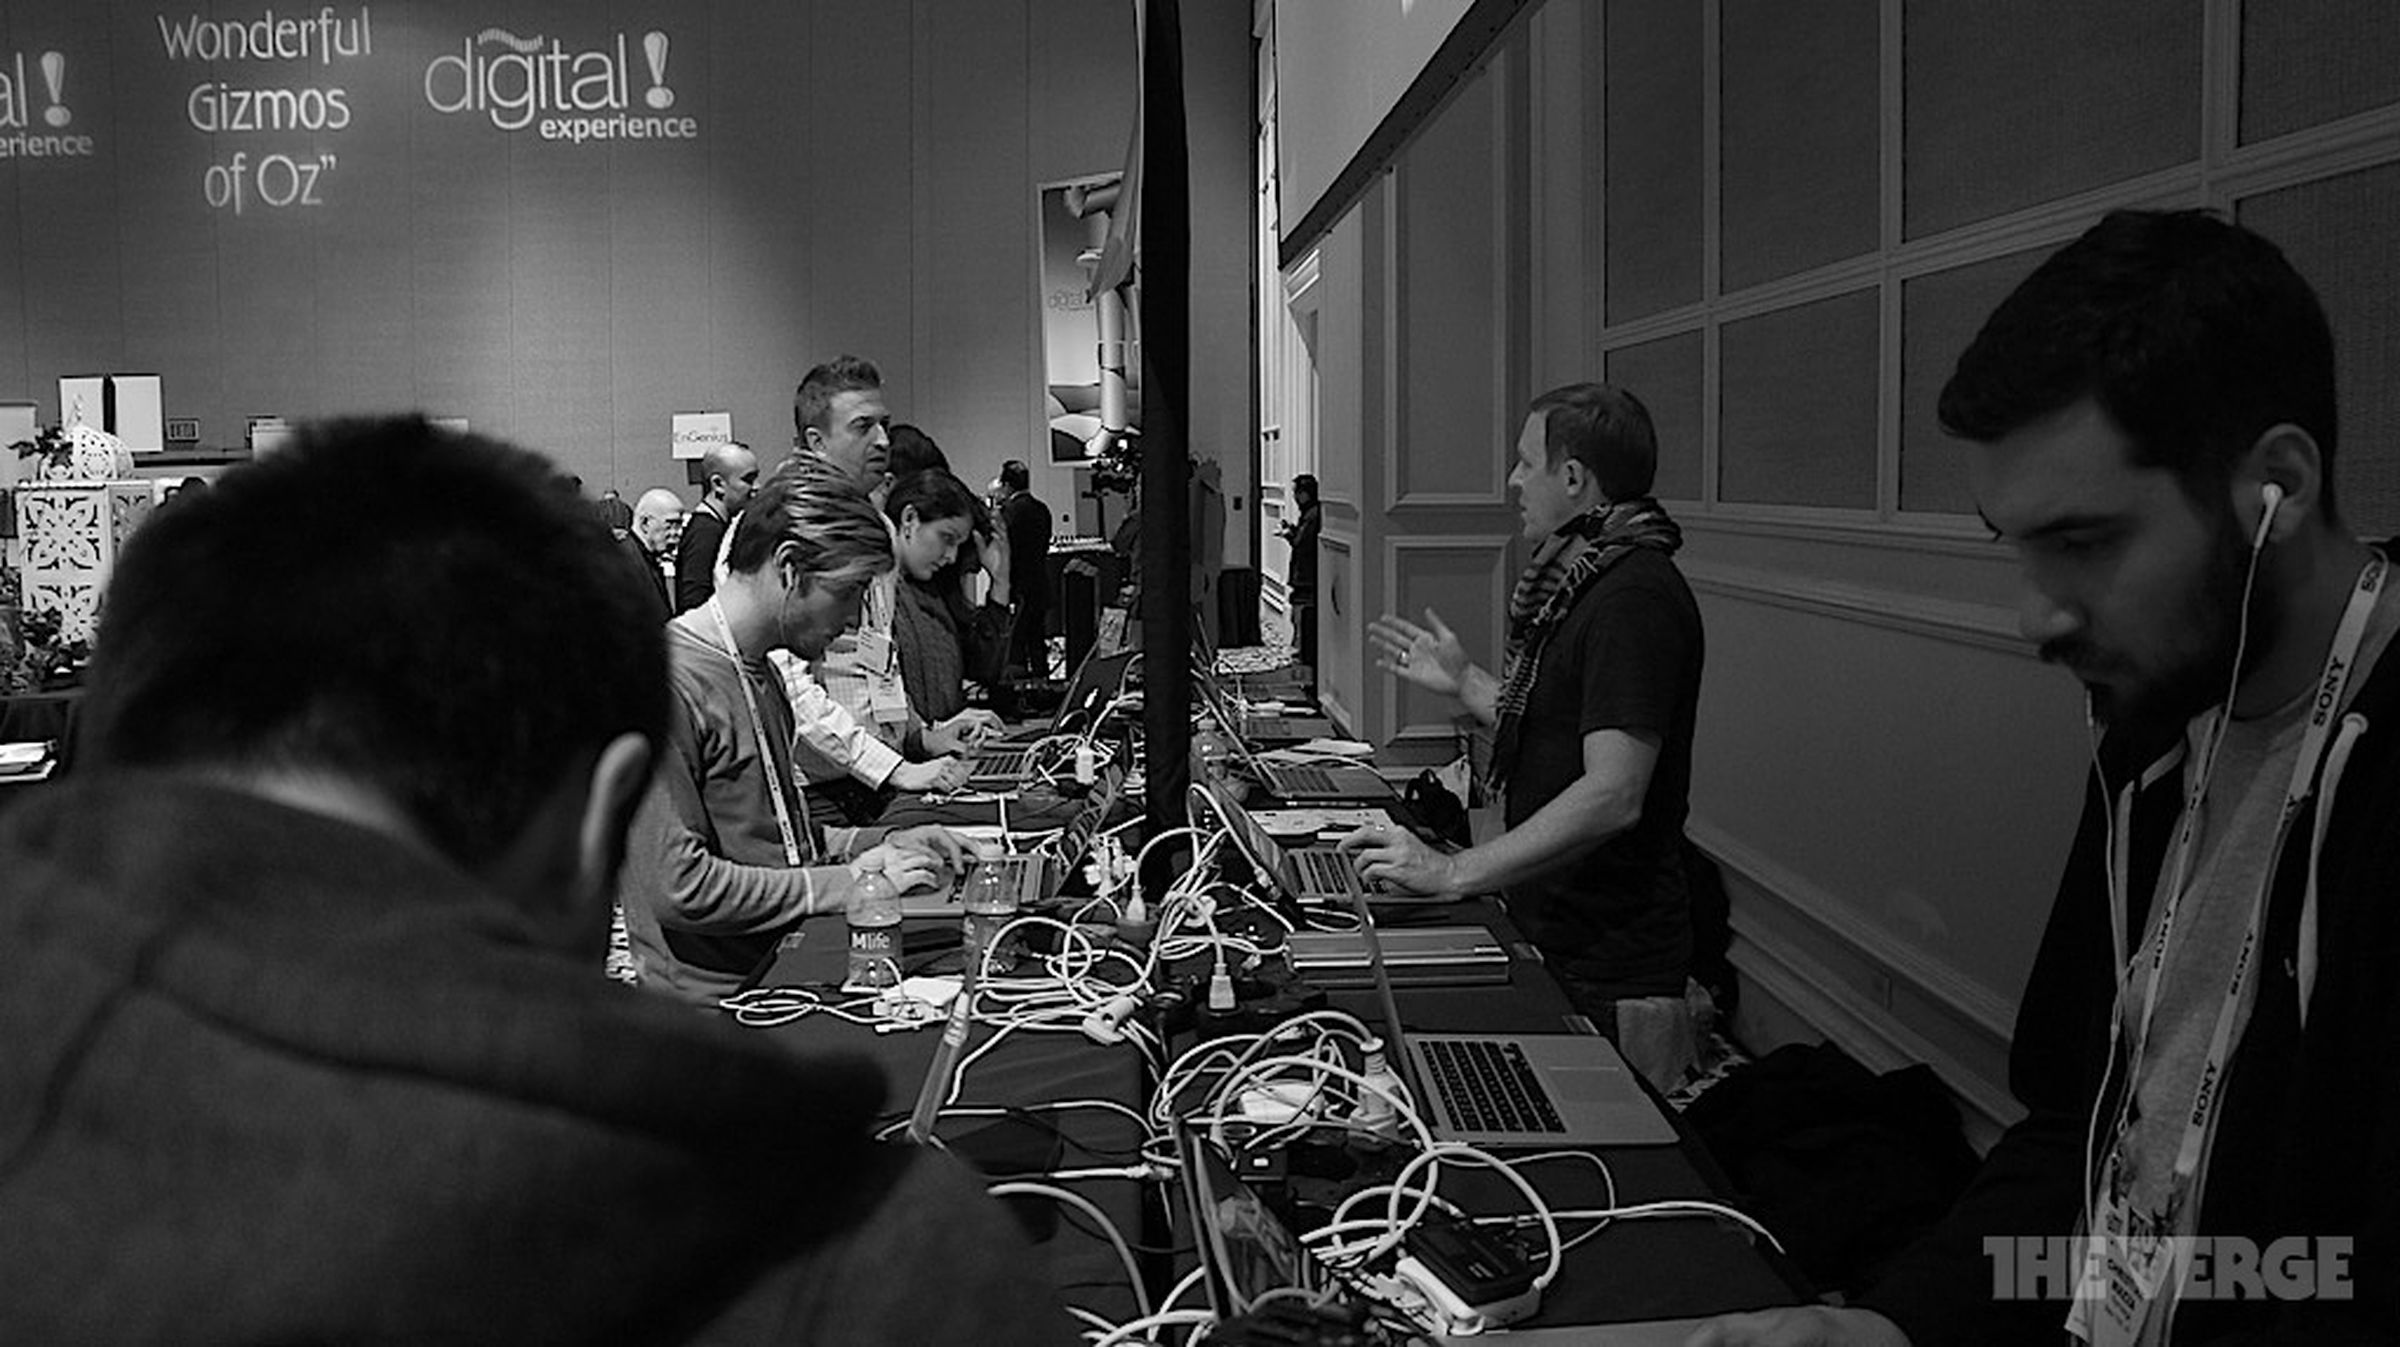 CES 2014: behind the scenes